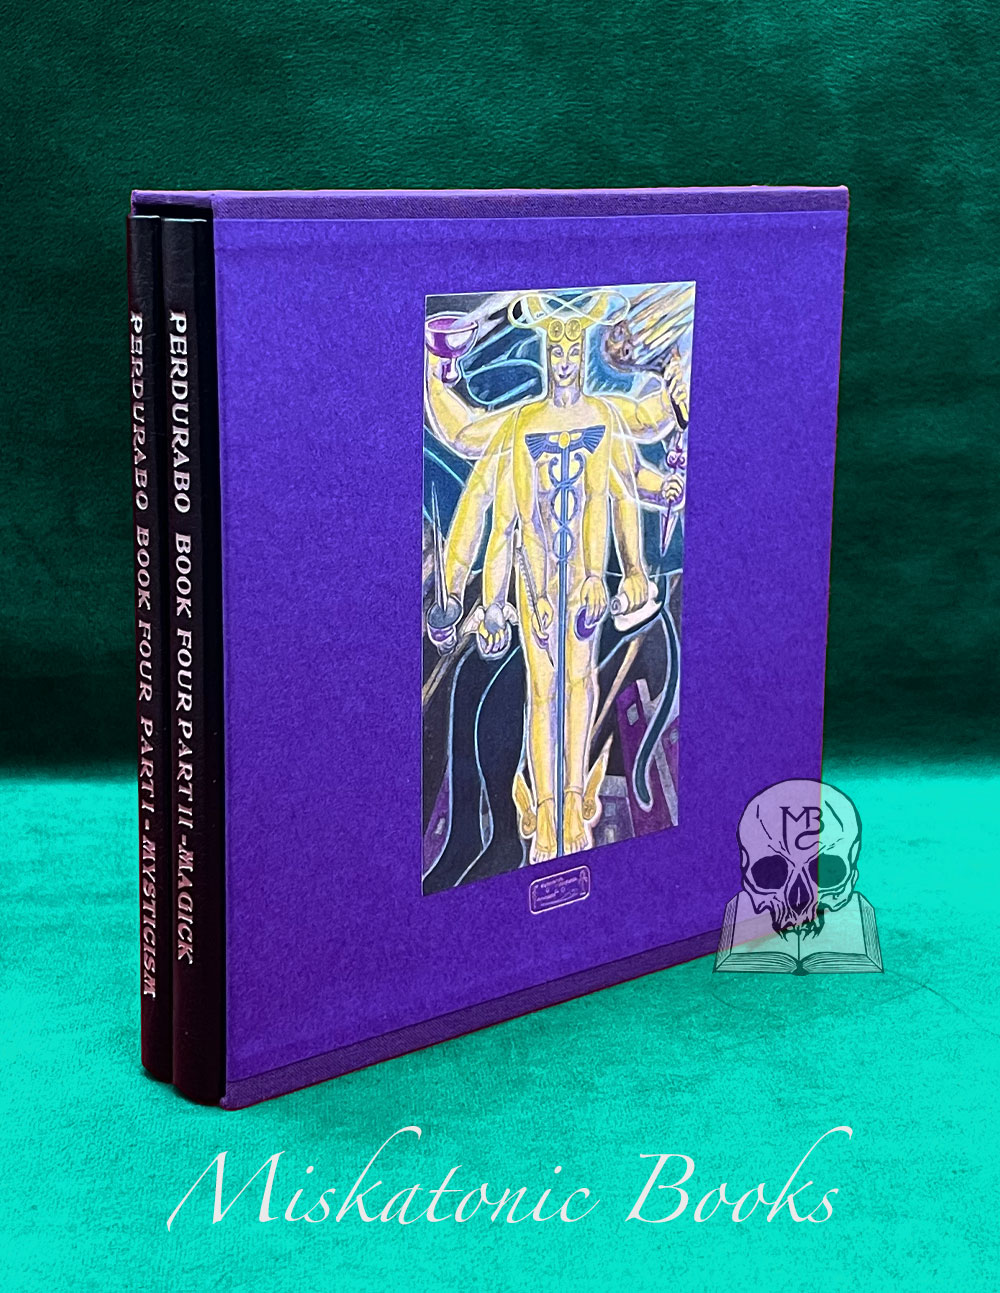 BOOK FOUR Part 1 : MYSTICISM &  Part 2 : MAGICK by Aleister Crowley and  Mary D’Este Sturges (Soror Virakam) - (DELUXE Limited Edition Hardcover Quarter Bound in Leather and Purple Linen)